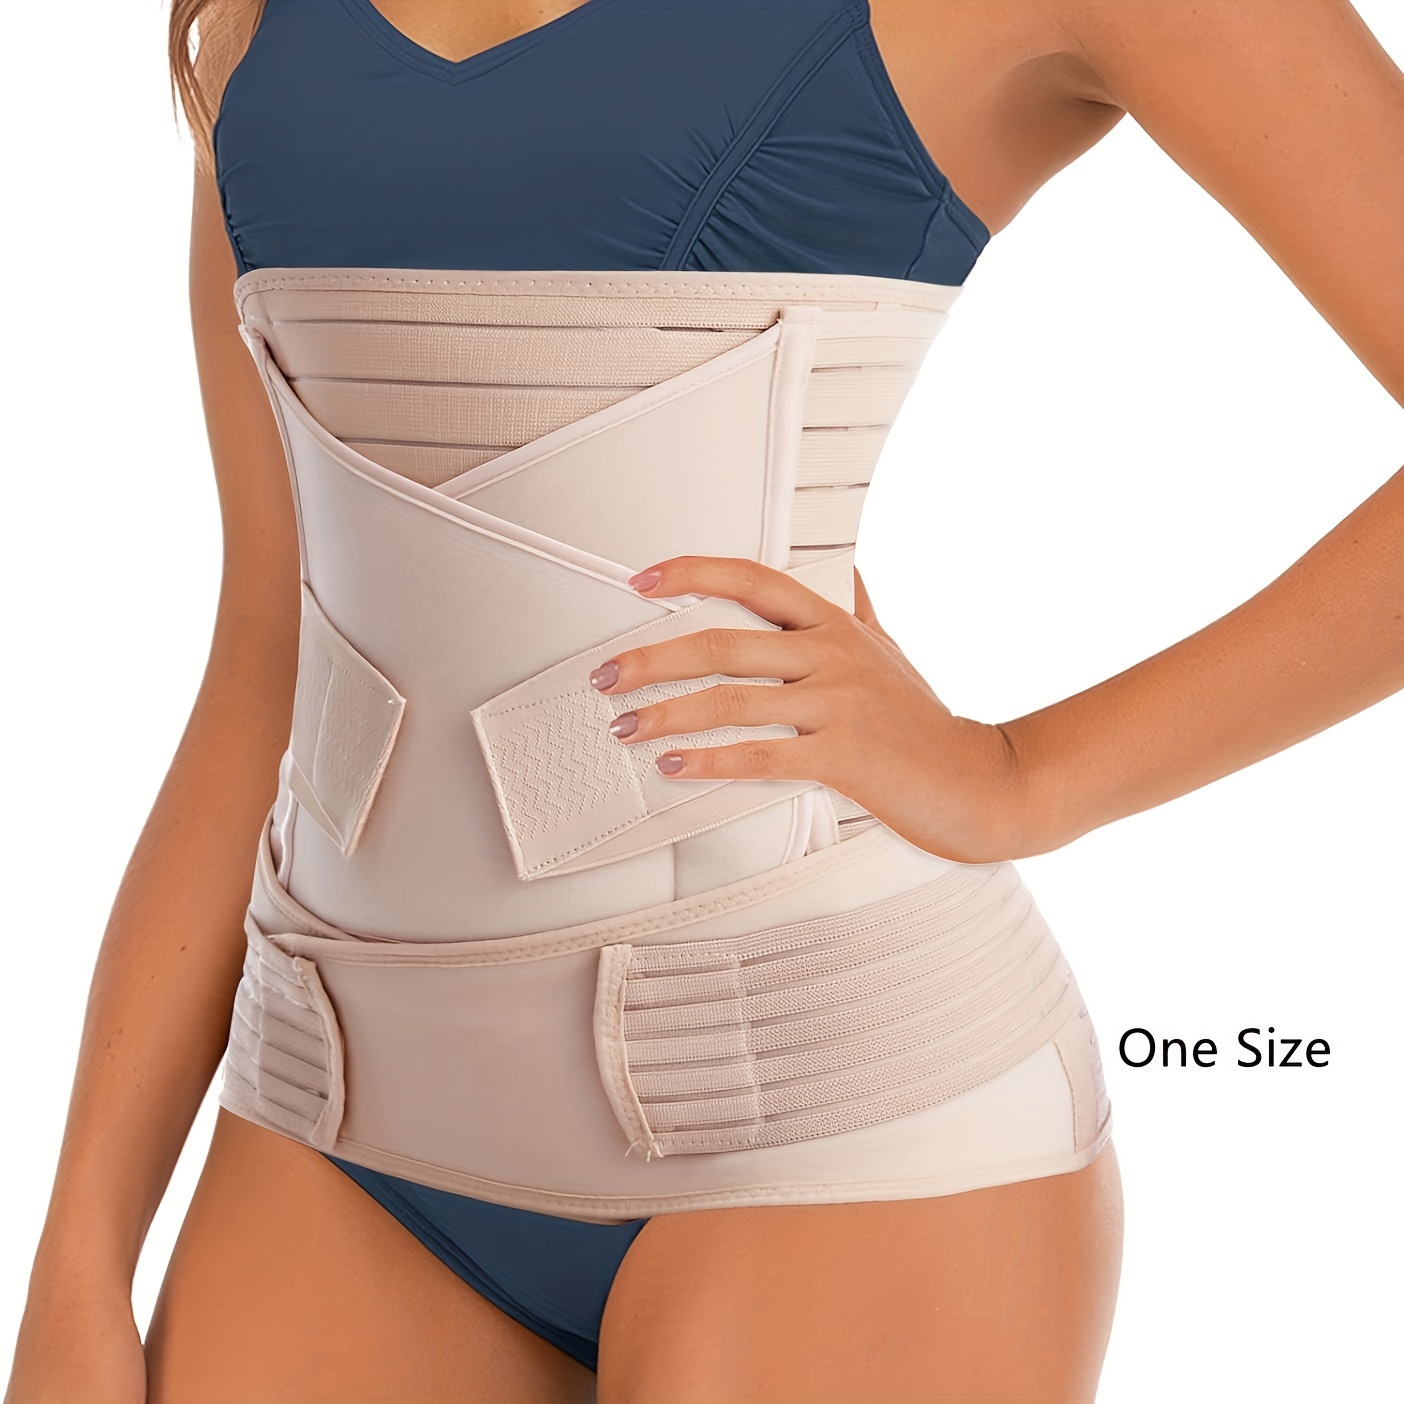  3 in 1 Postpartum Belly Band Wrap Support Recovery Girdles  Abdominer Binder Post Surgery Belly&Waist&Pelvis Support Belt & Back  Brace(Beige, Small/Medium) : Health & Household